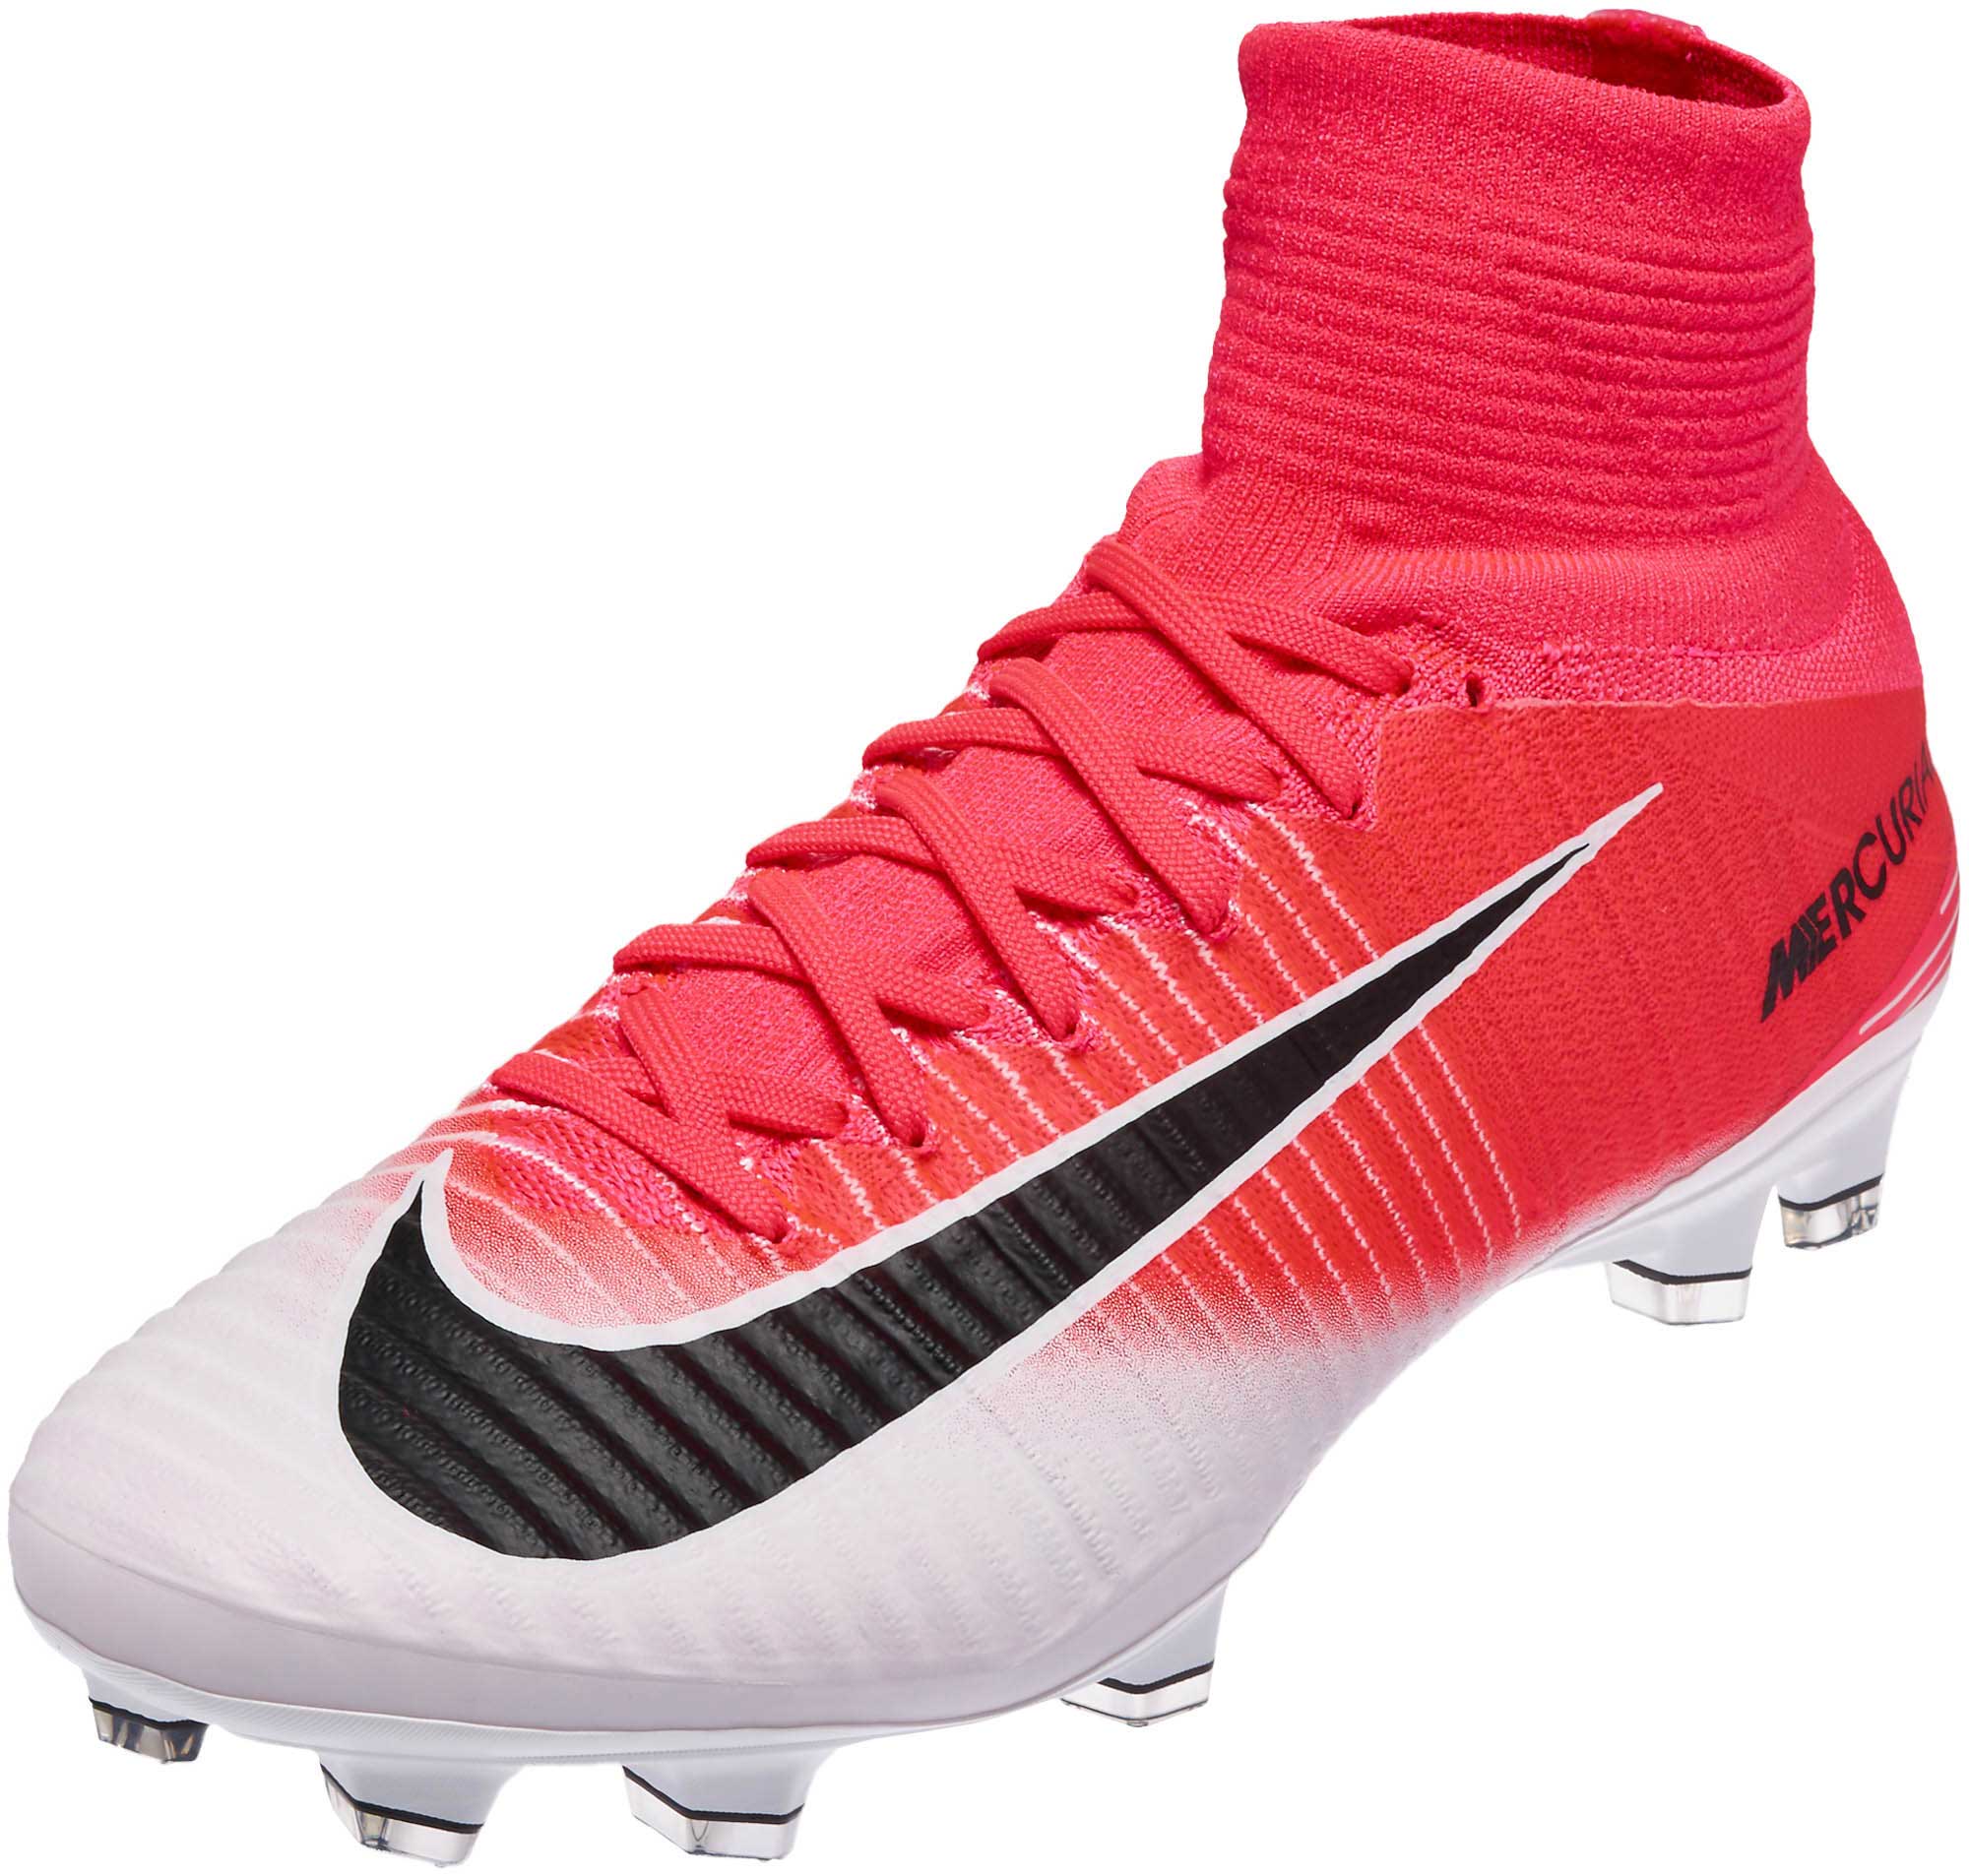 nike mercurial superfly 5 pink and white